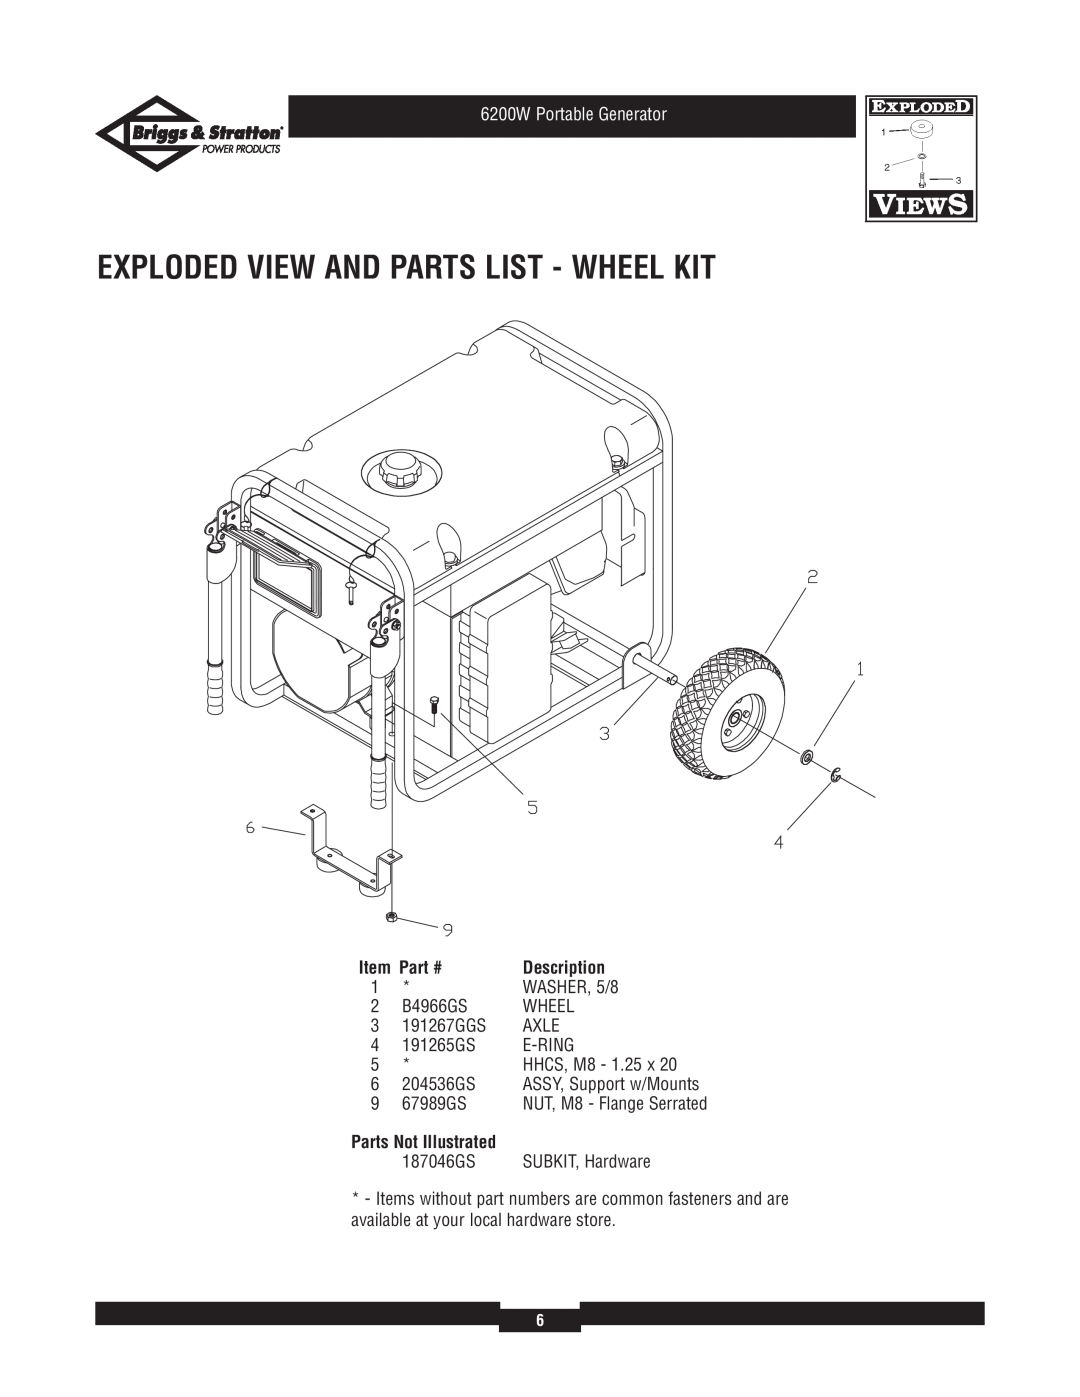 Briggs & Stratton 030211-1 manual Exploded View And Parts List - Wheel Kit, 6200W Portable Generator, Description 